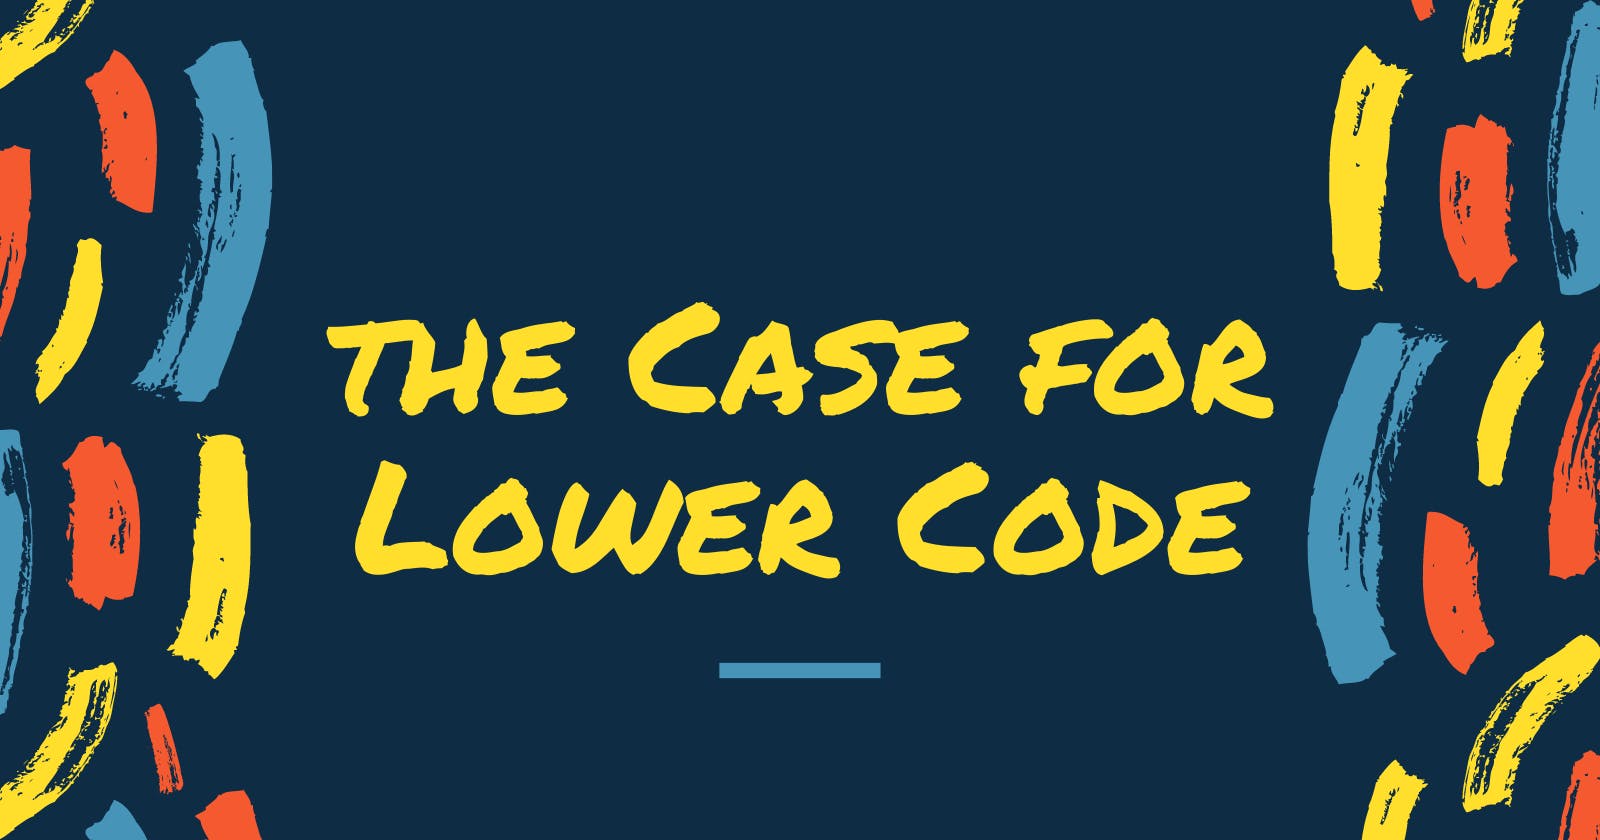 The Case for Lower Code